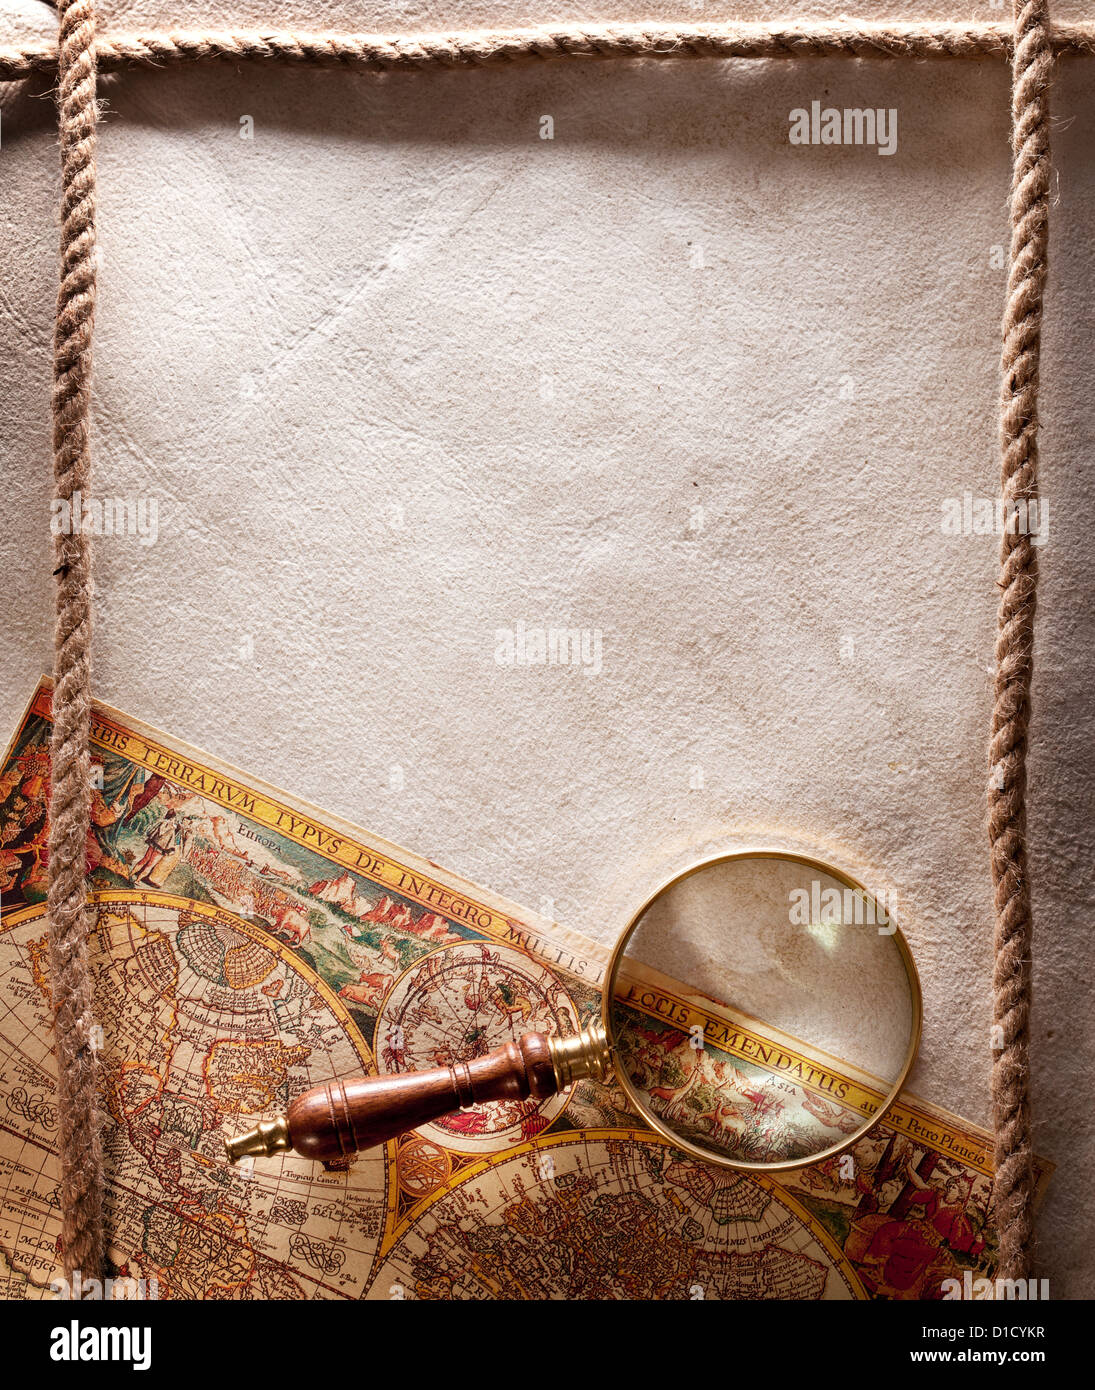 Magnifying glass on old parchment. Stock Photo